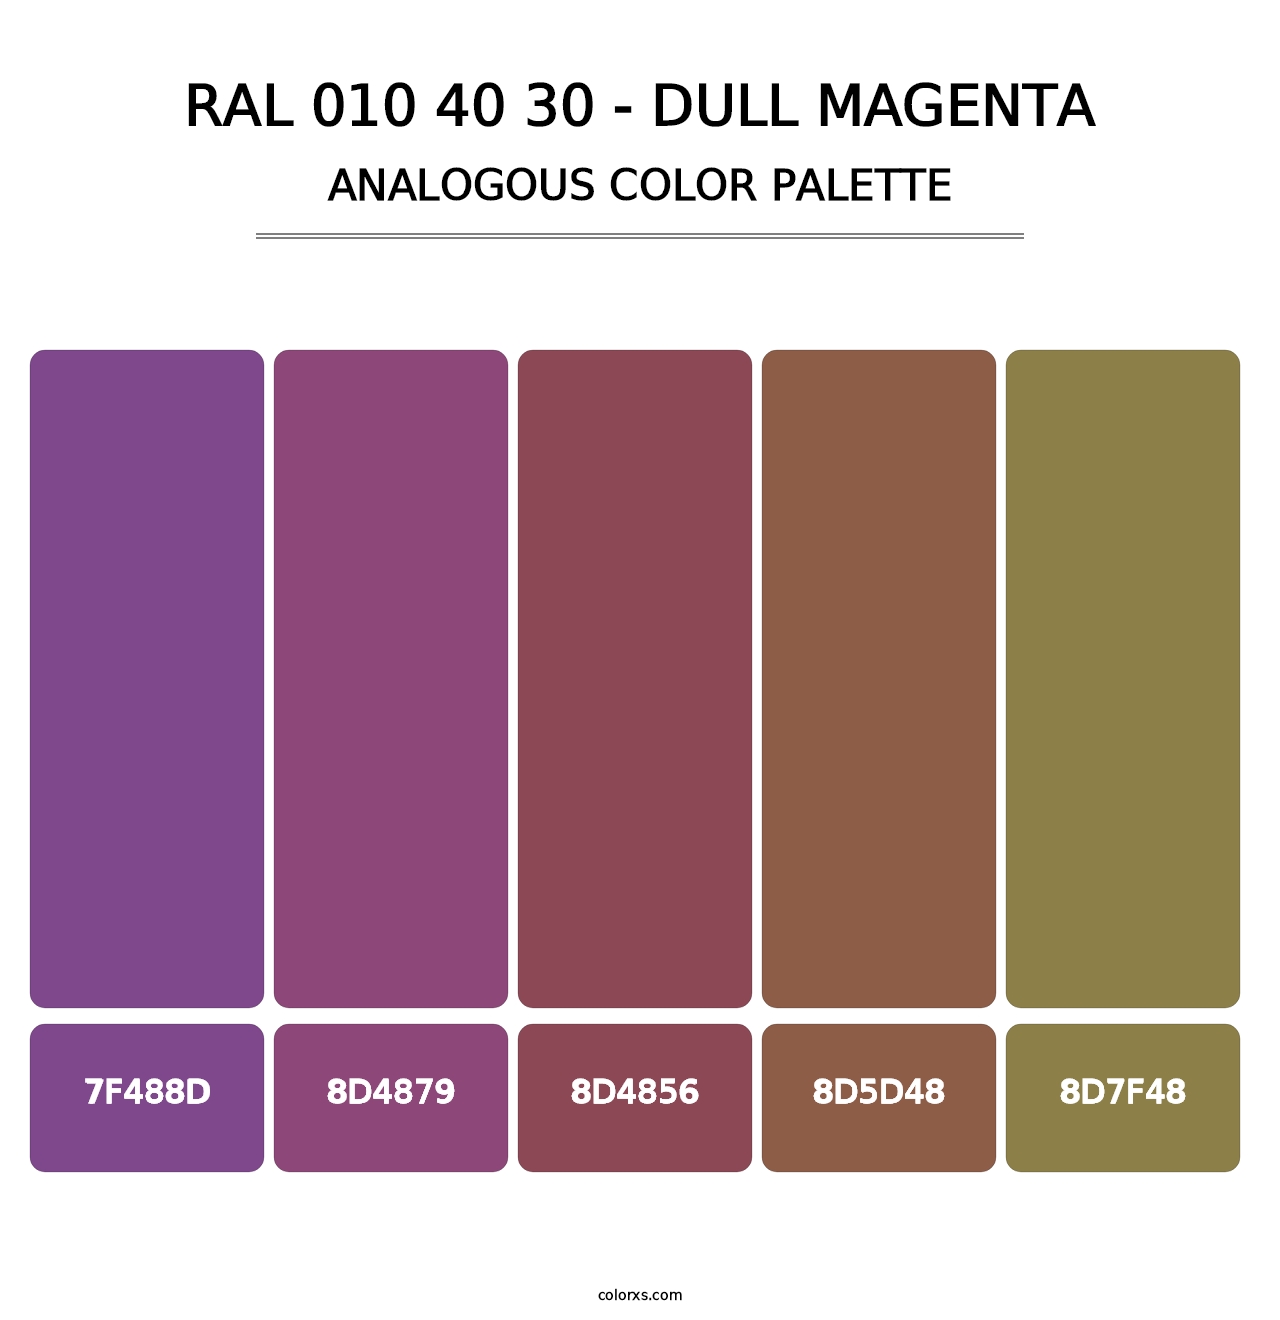 RAL 010 40 30 - Dull Magenta - Analogous Color Palette